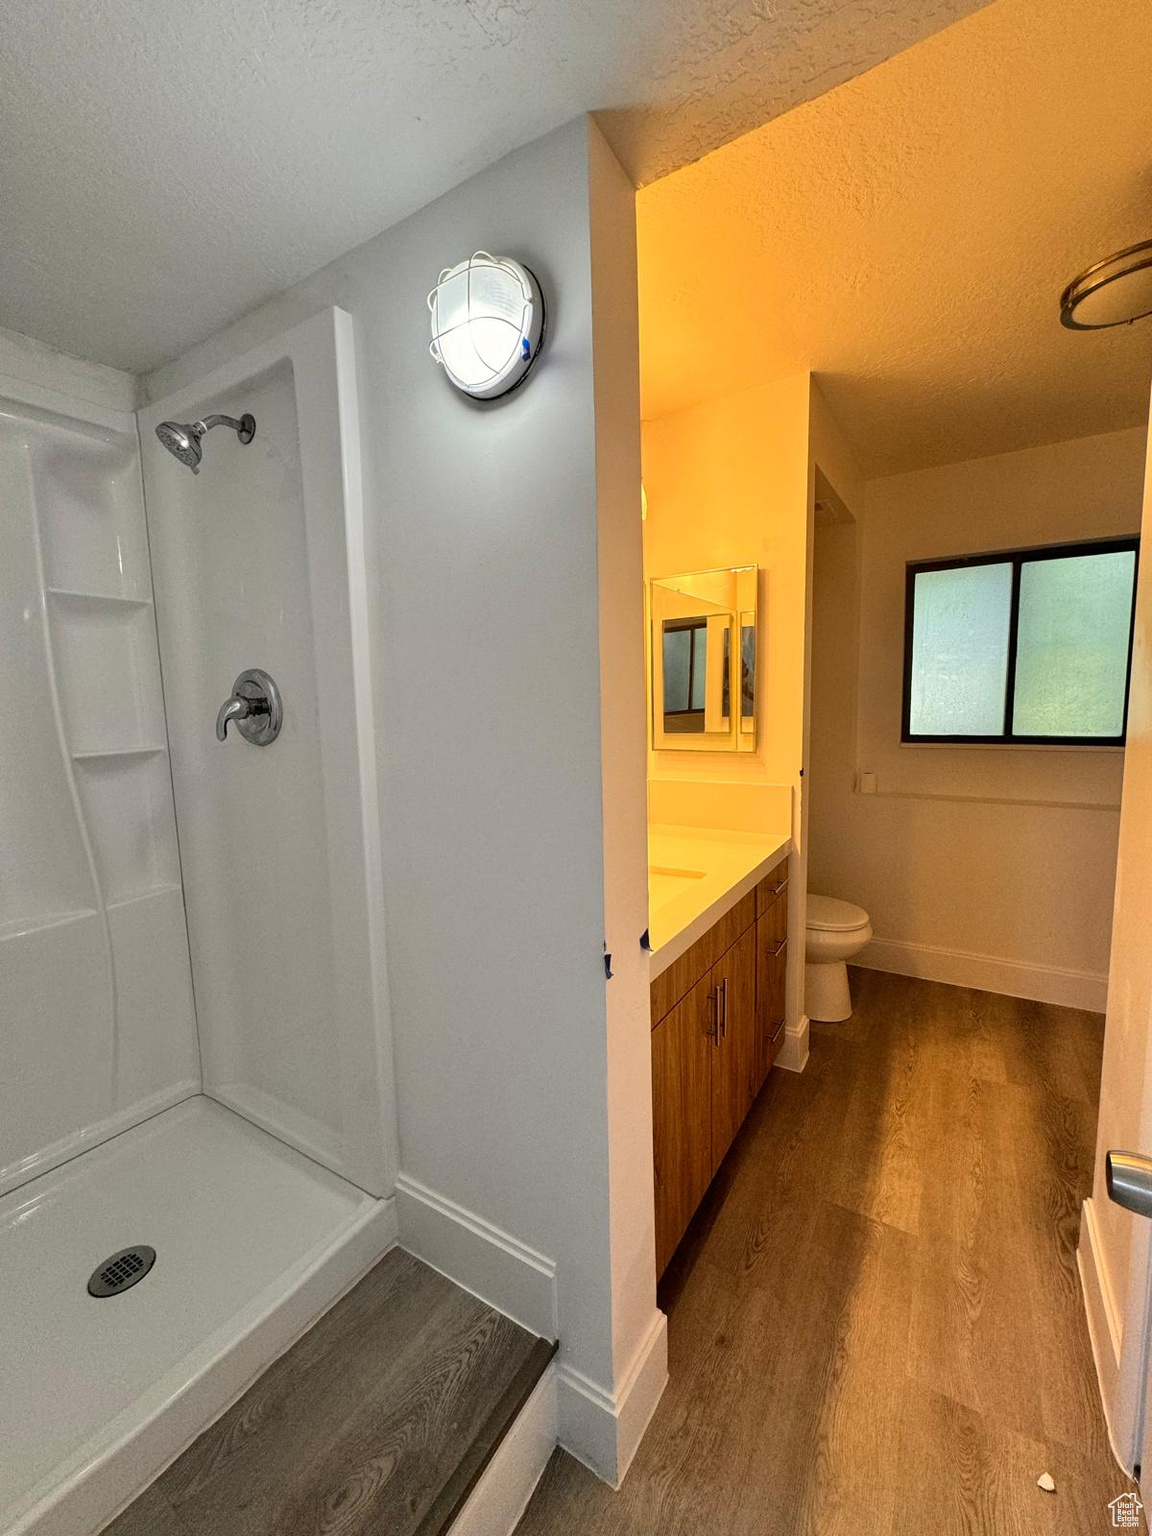 Bathroom featuring a textured ceiling, hardwood / wood-style floors, a shower, vanity, and toilet